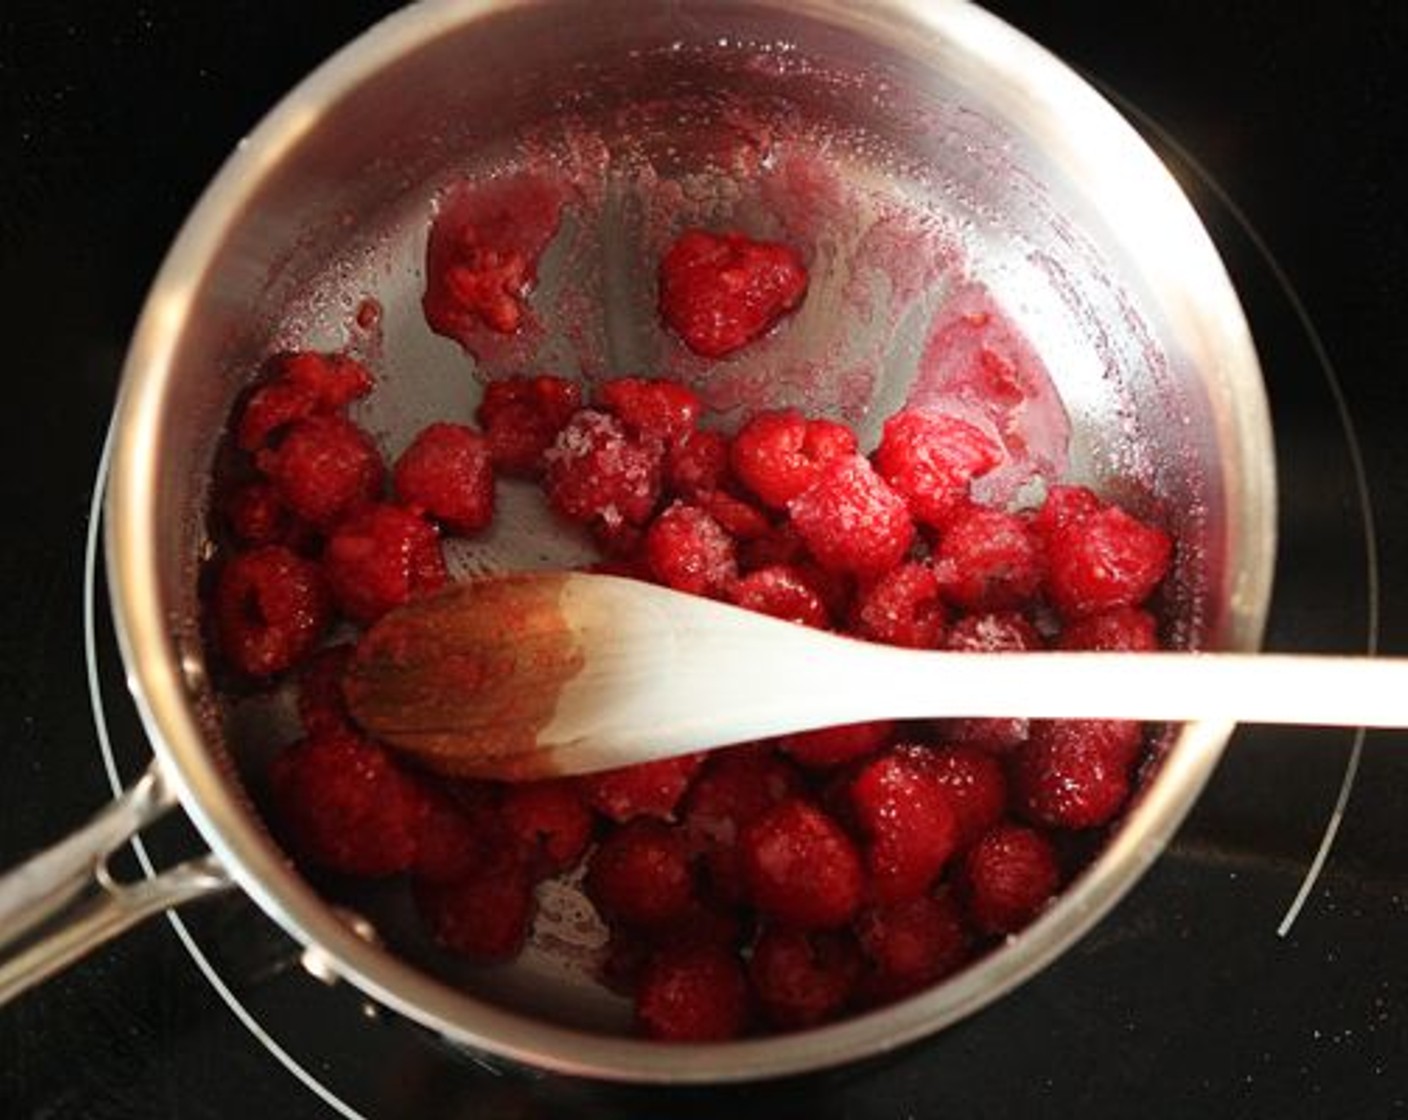 step 11 Combine Fresh Raspberries (1 1/3 cups) and Granulated Sugar (1/4 cup) in a small saucepan over medium-high heat. Bring to a boil and cook for 8-10 minutes, stirring often to break down the berries.